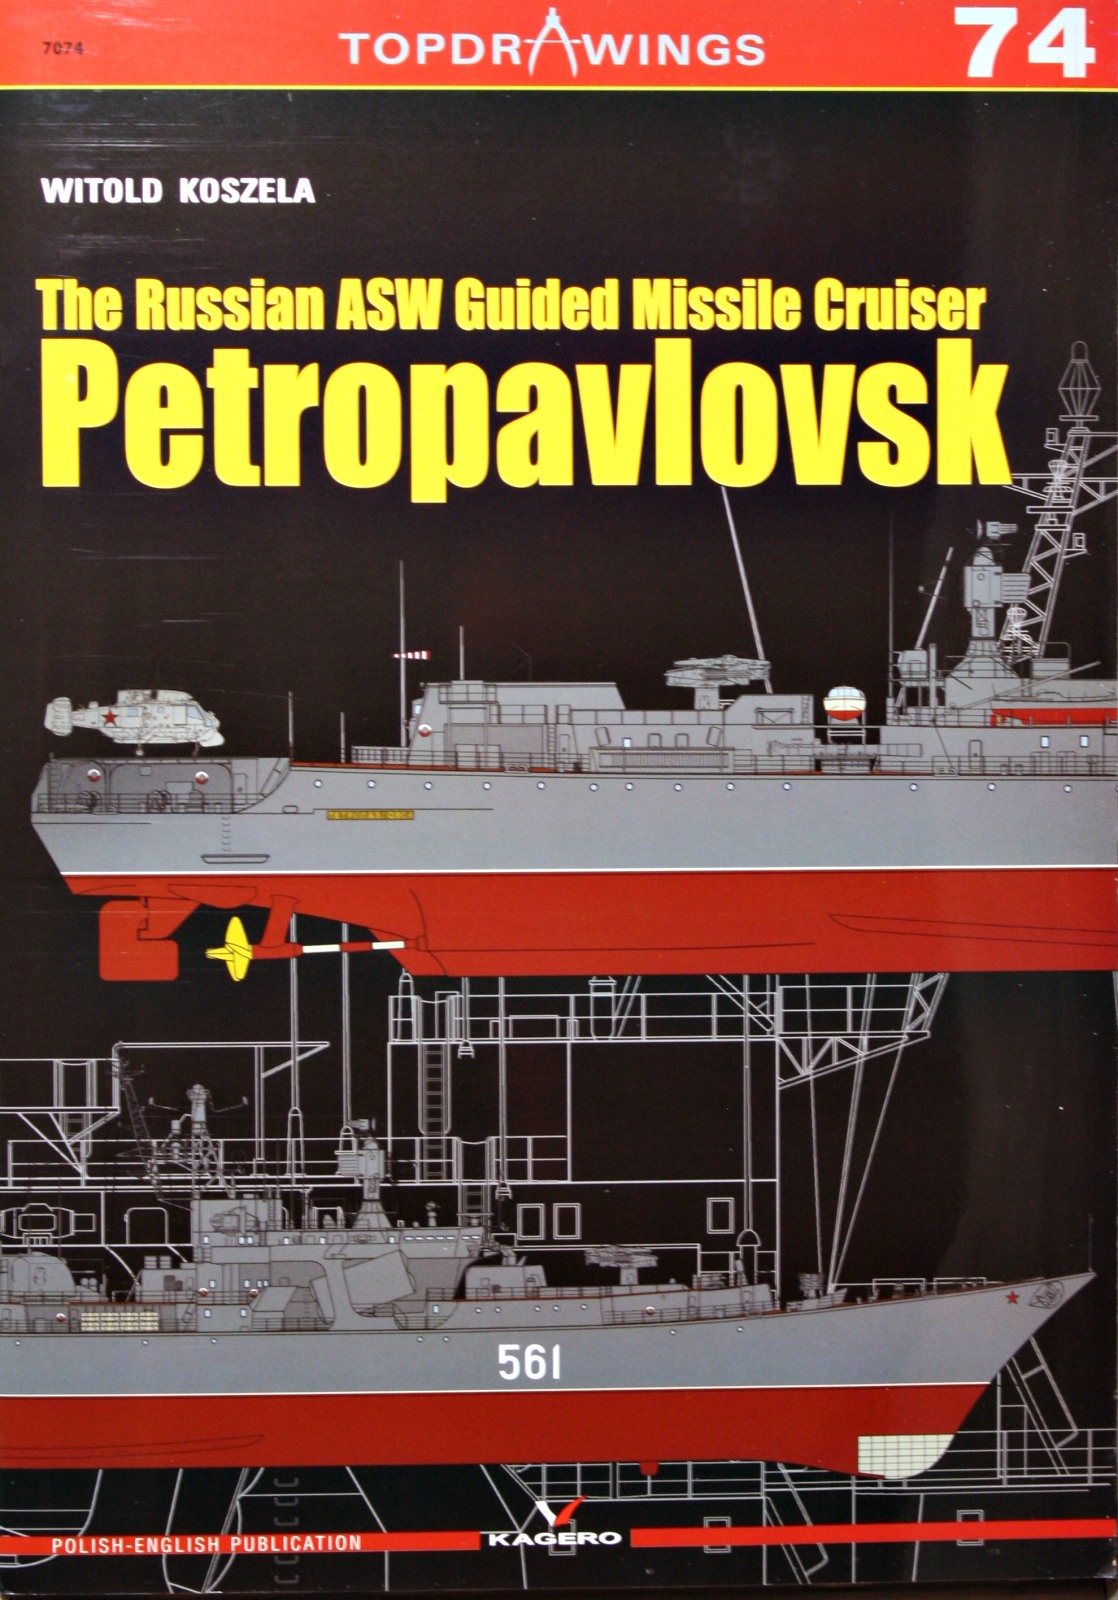 The The Russian ASW Guided Missile Cruiser Petropavlovsk. Top 